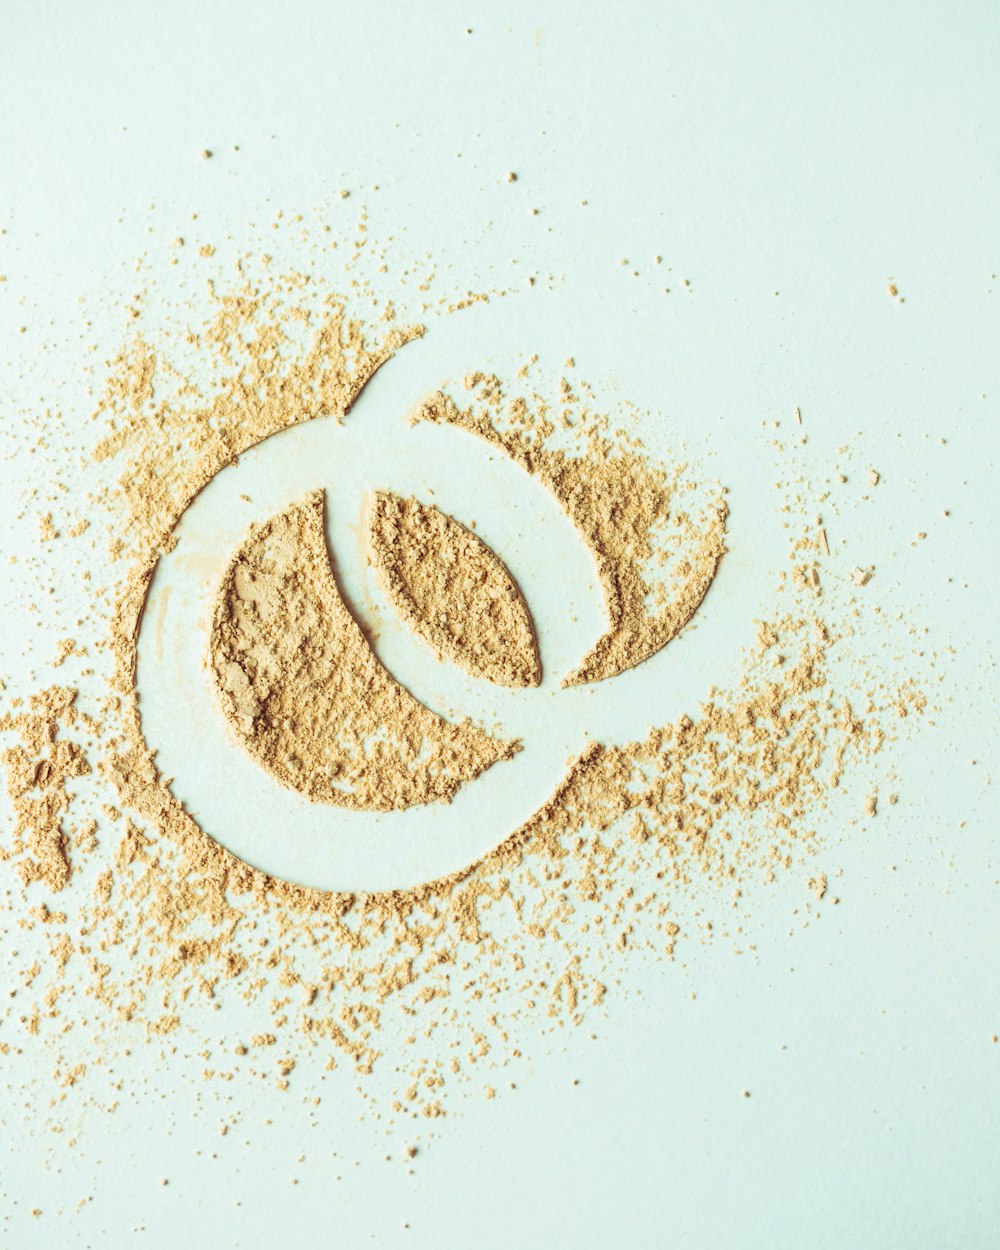 a pile of sand with two rings drawn in it